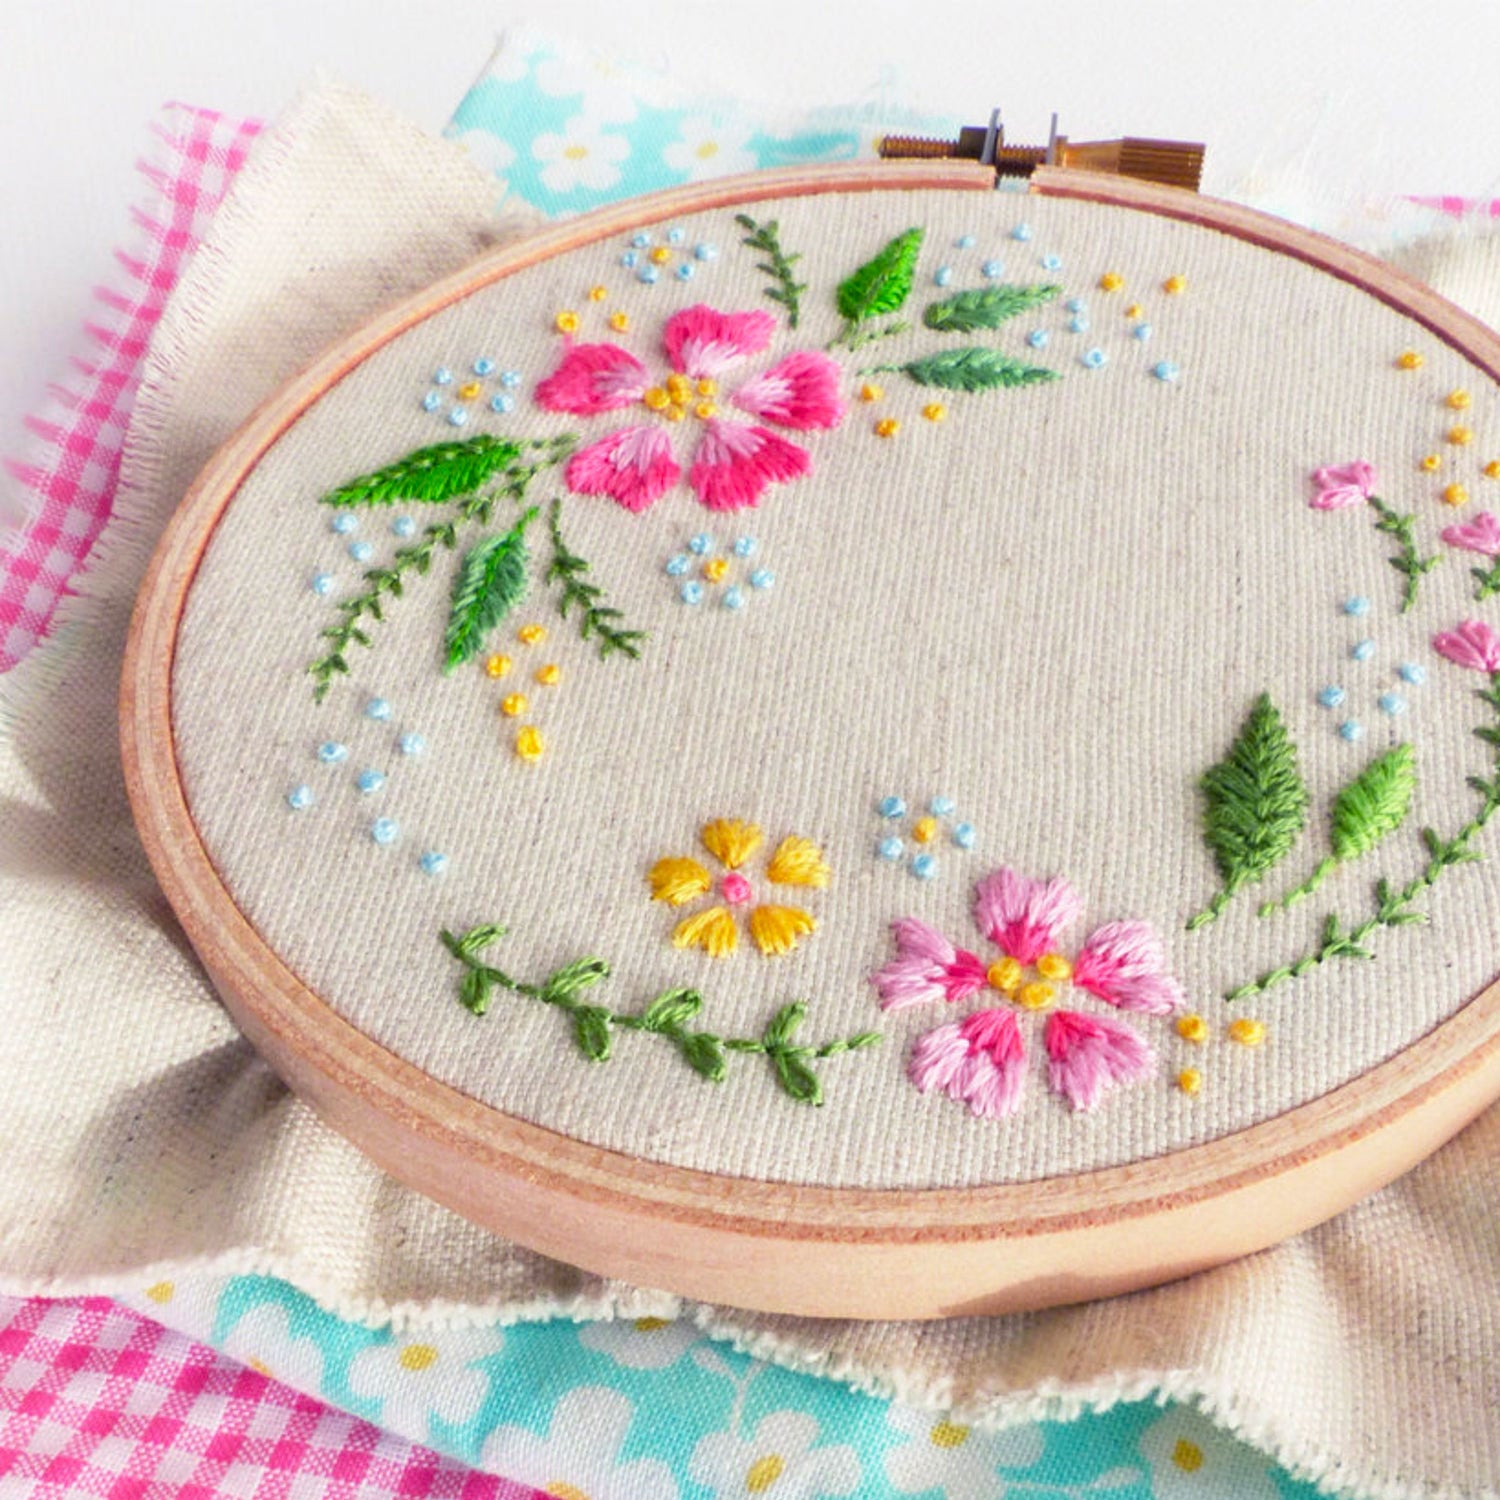 Beginner Floral Embroidery Pattern - The Yellow Birdhouse